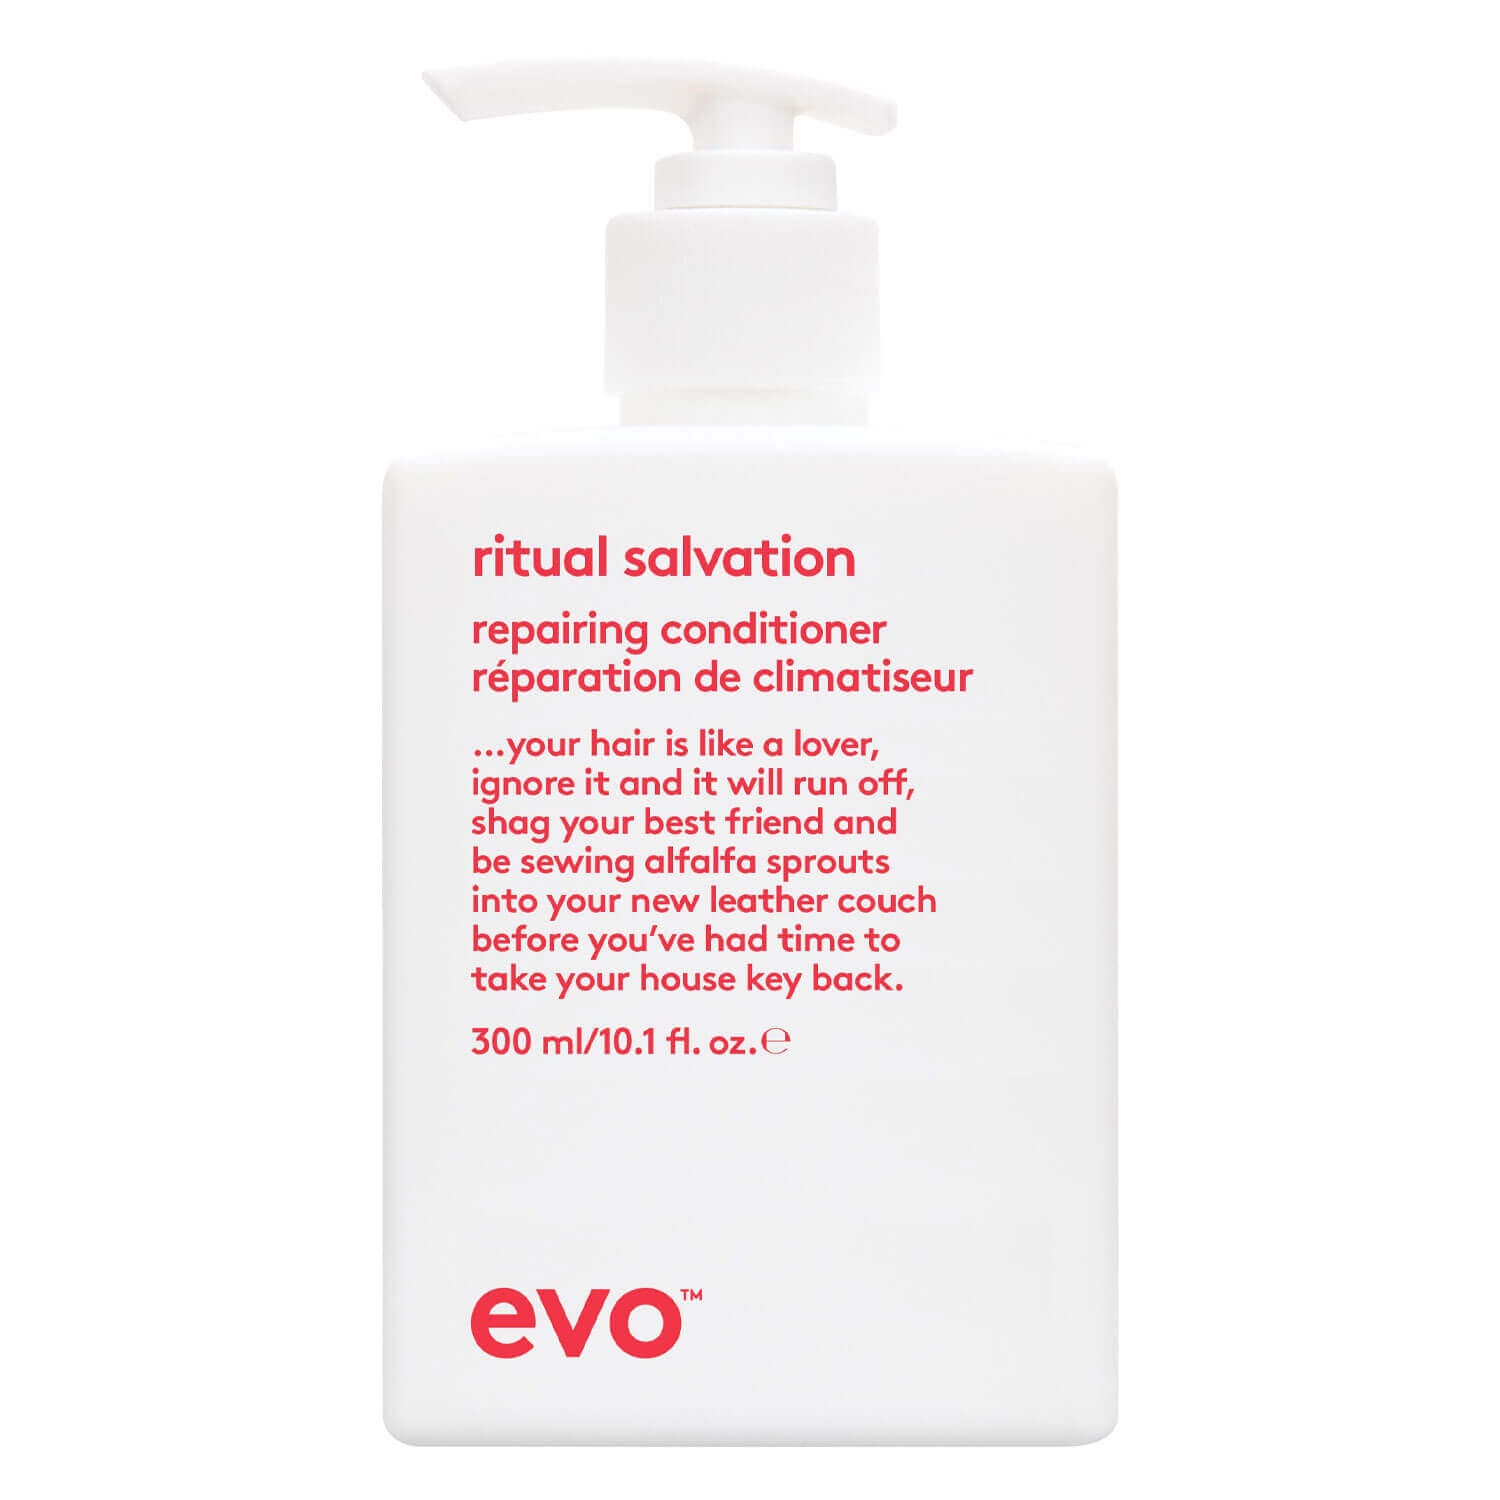 Product image from evo care - ritual salvation repairing conditioner